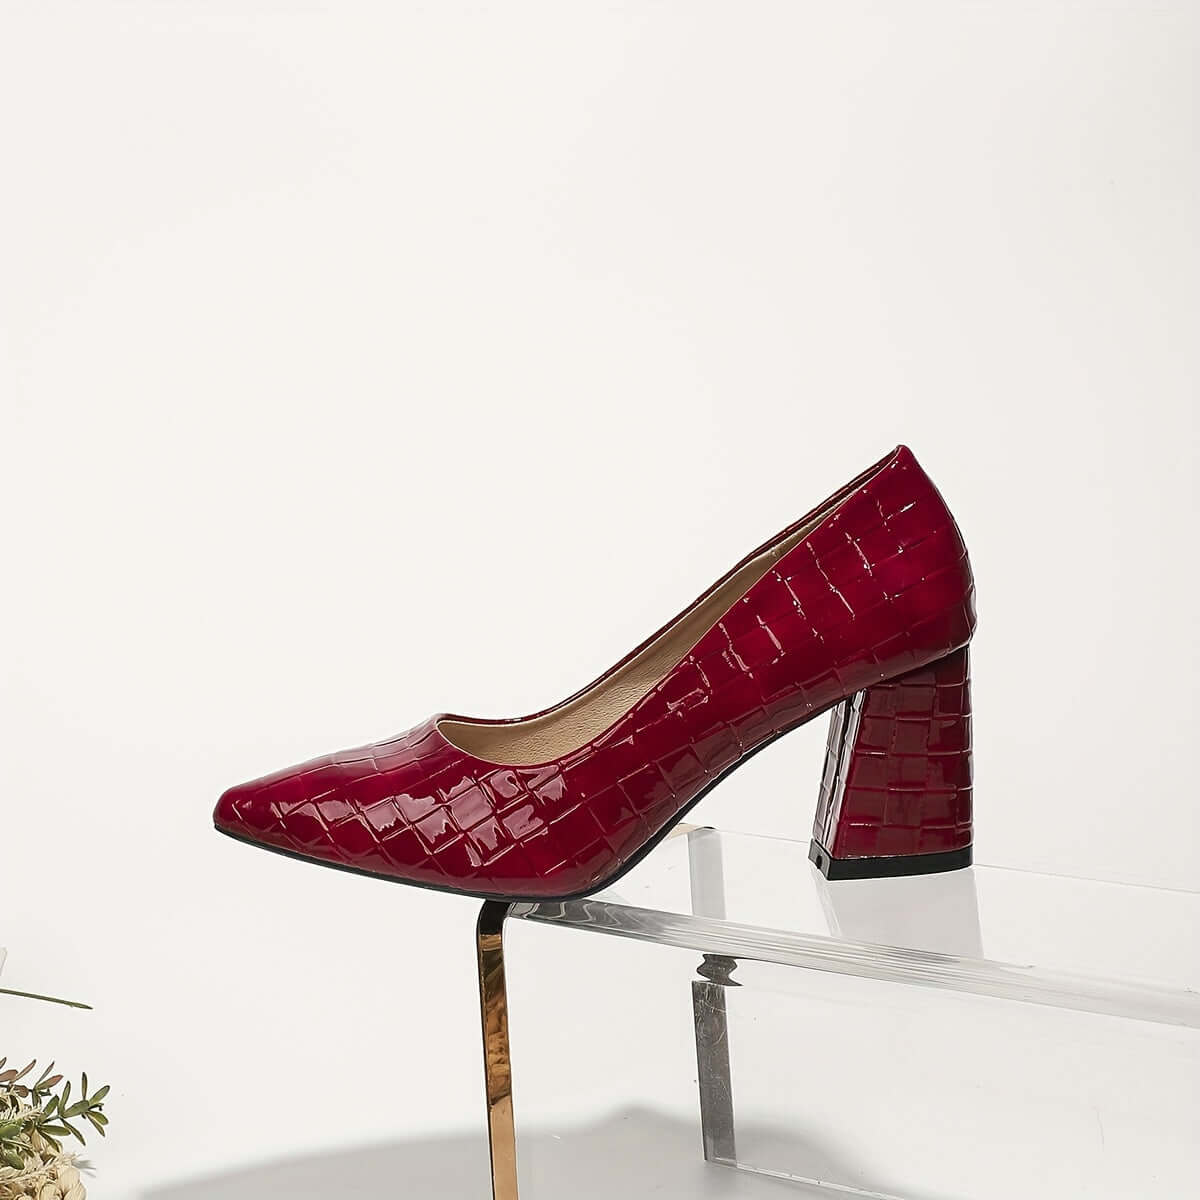 Step Into Style: Comfy Pointe Toe Slip-On Plaid Block Heel Pumps